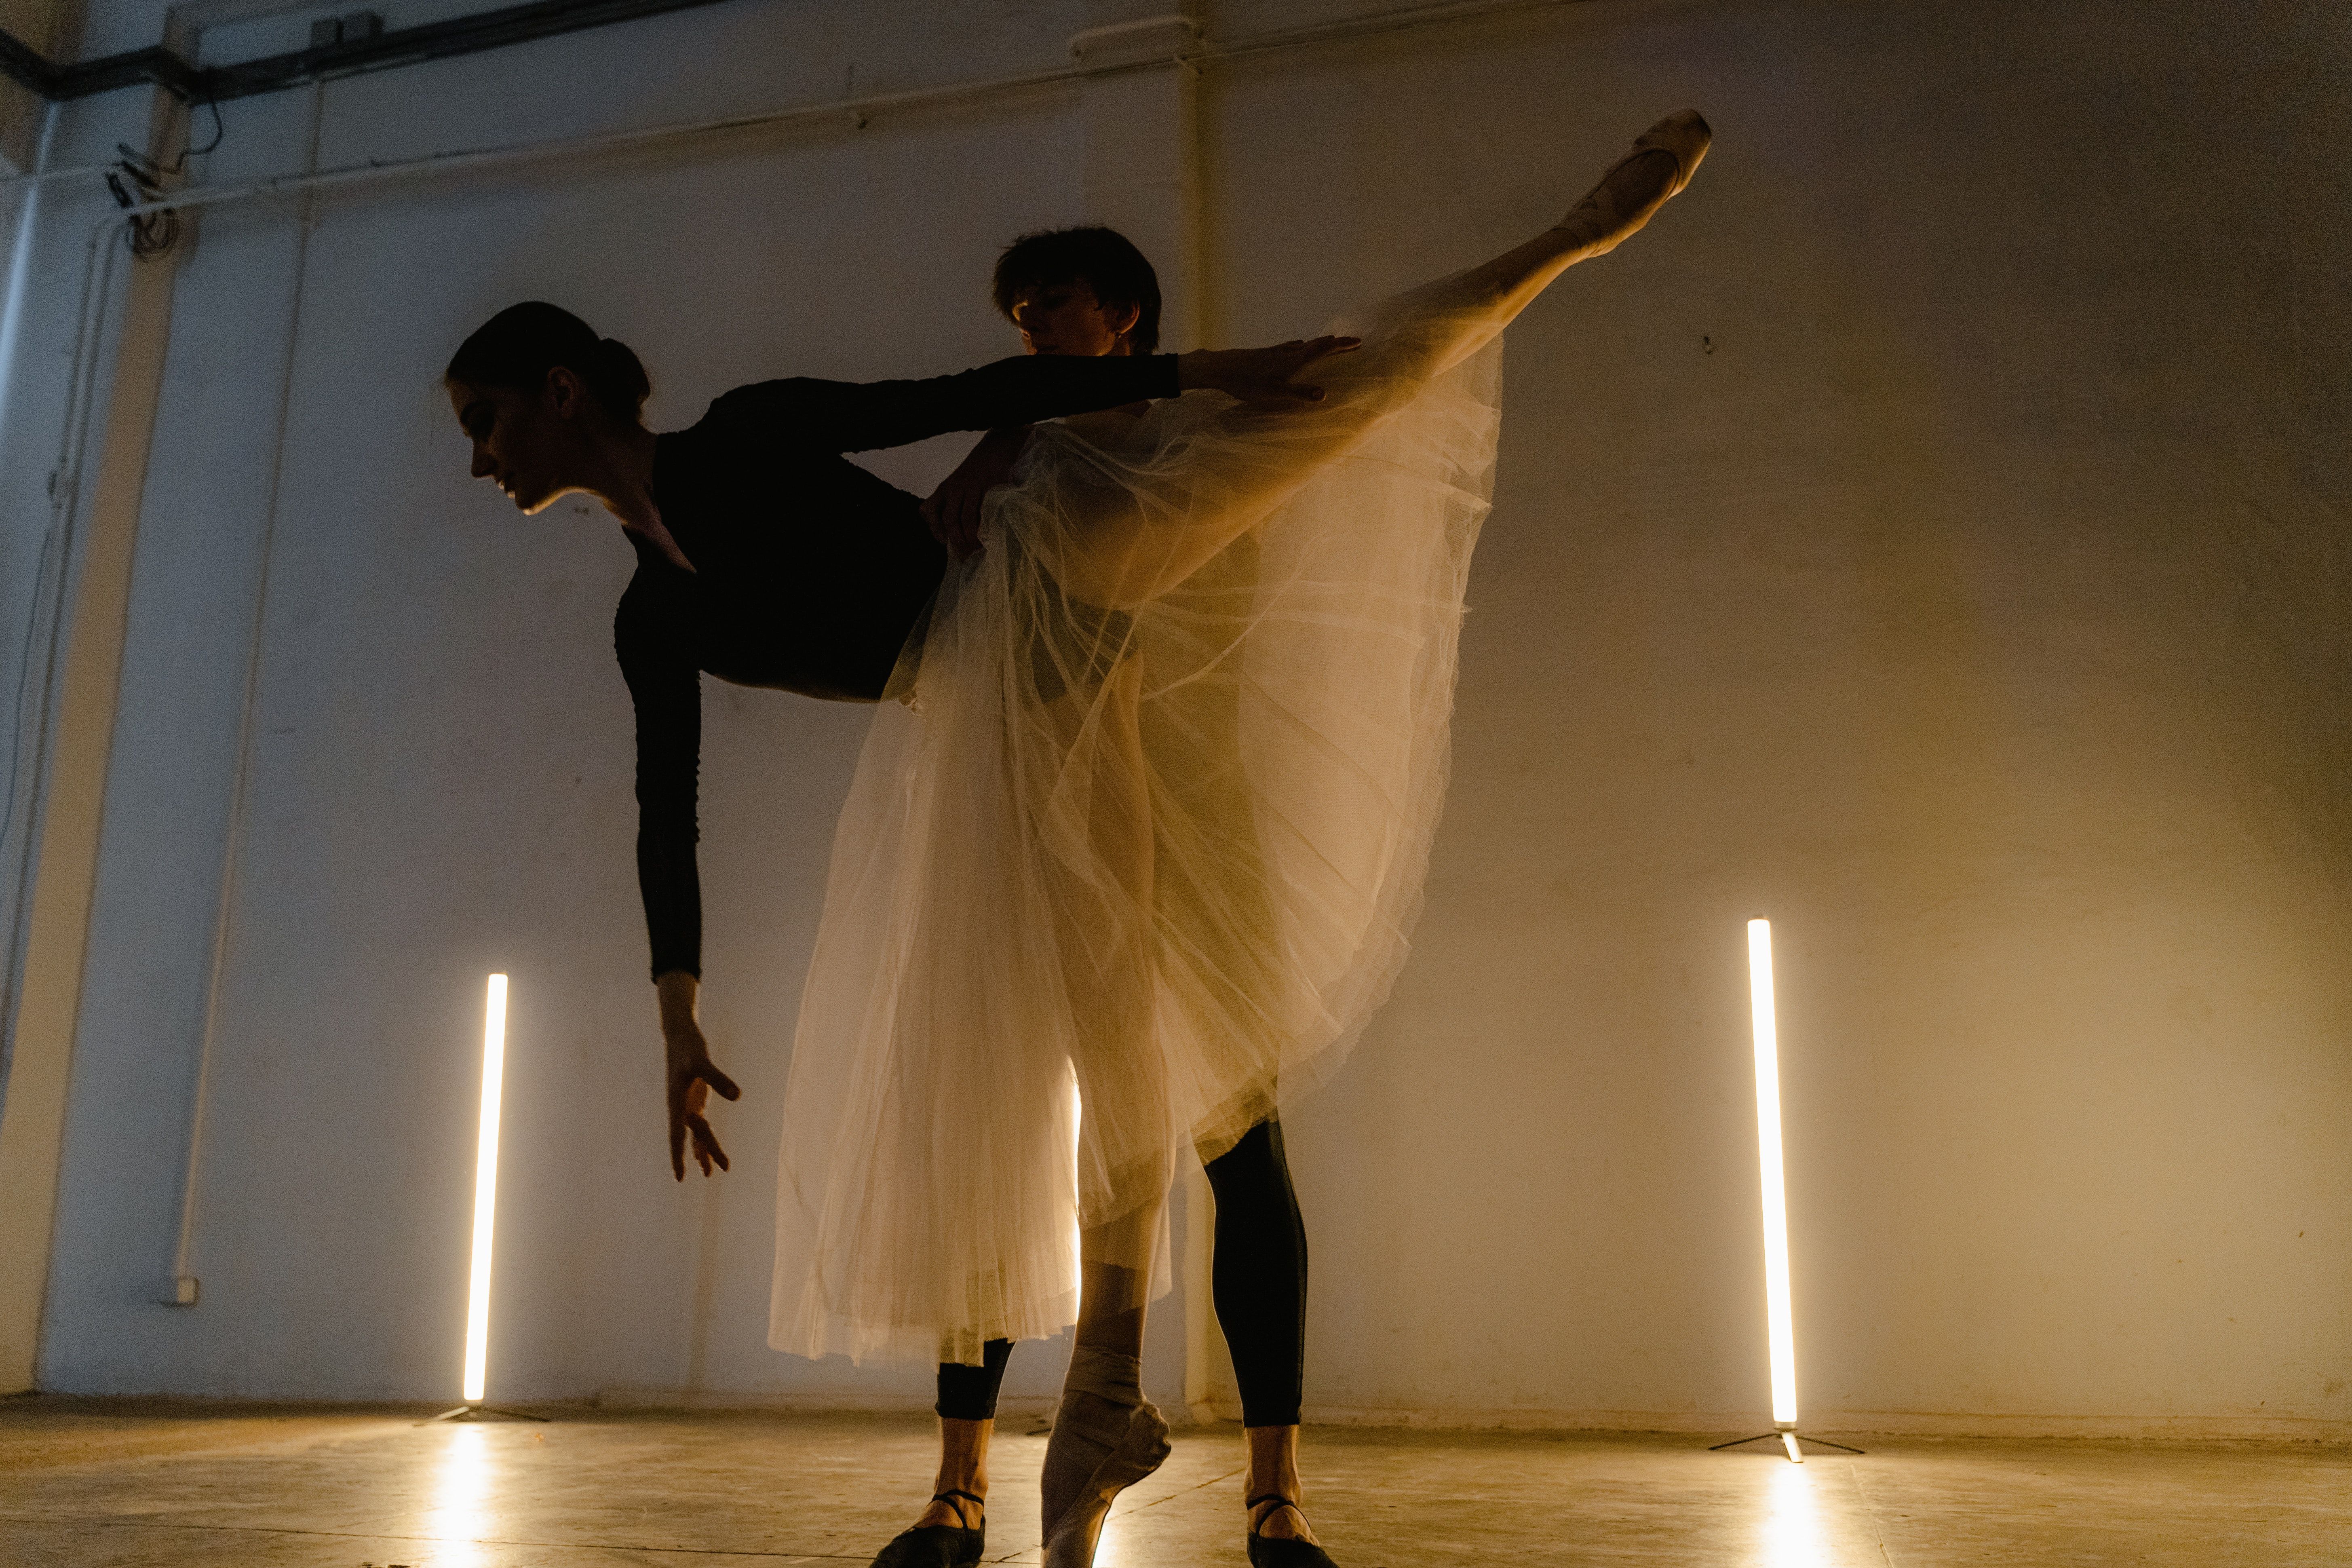 A woman with a prosthetic leg dances with a partner in a studio. - Ballet